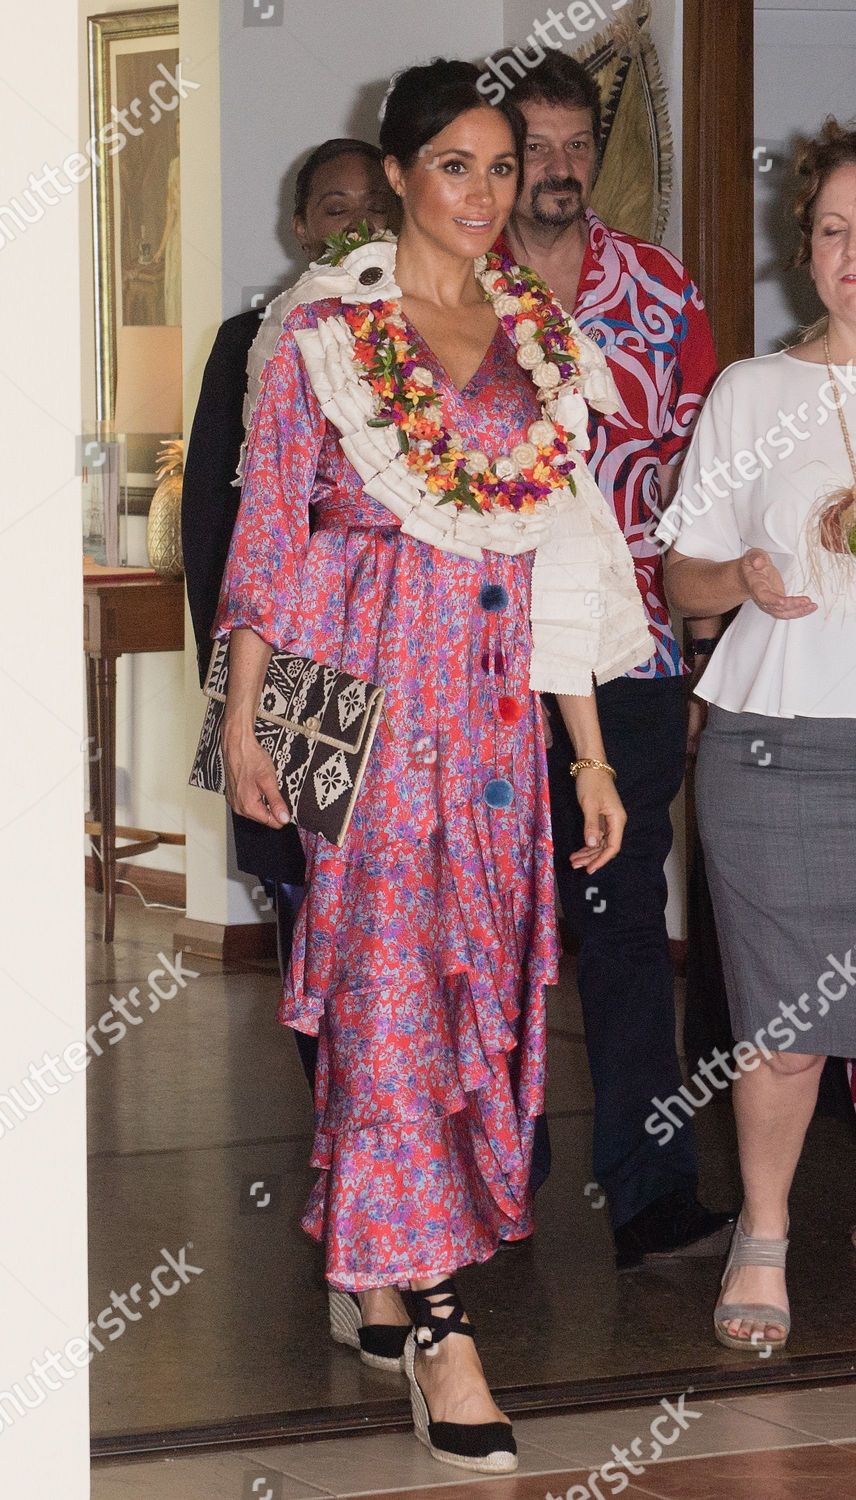 prince-harry-and-meghan-duchess-of-sussex-tour-of-fiji-shutterstock-editorial-9942743bb.jpg